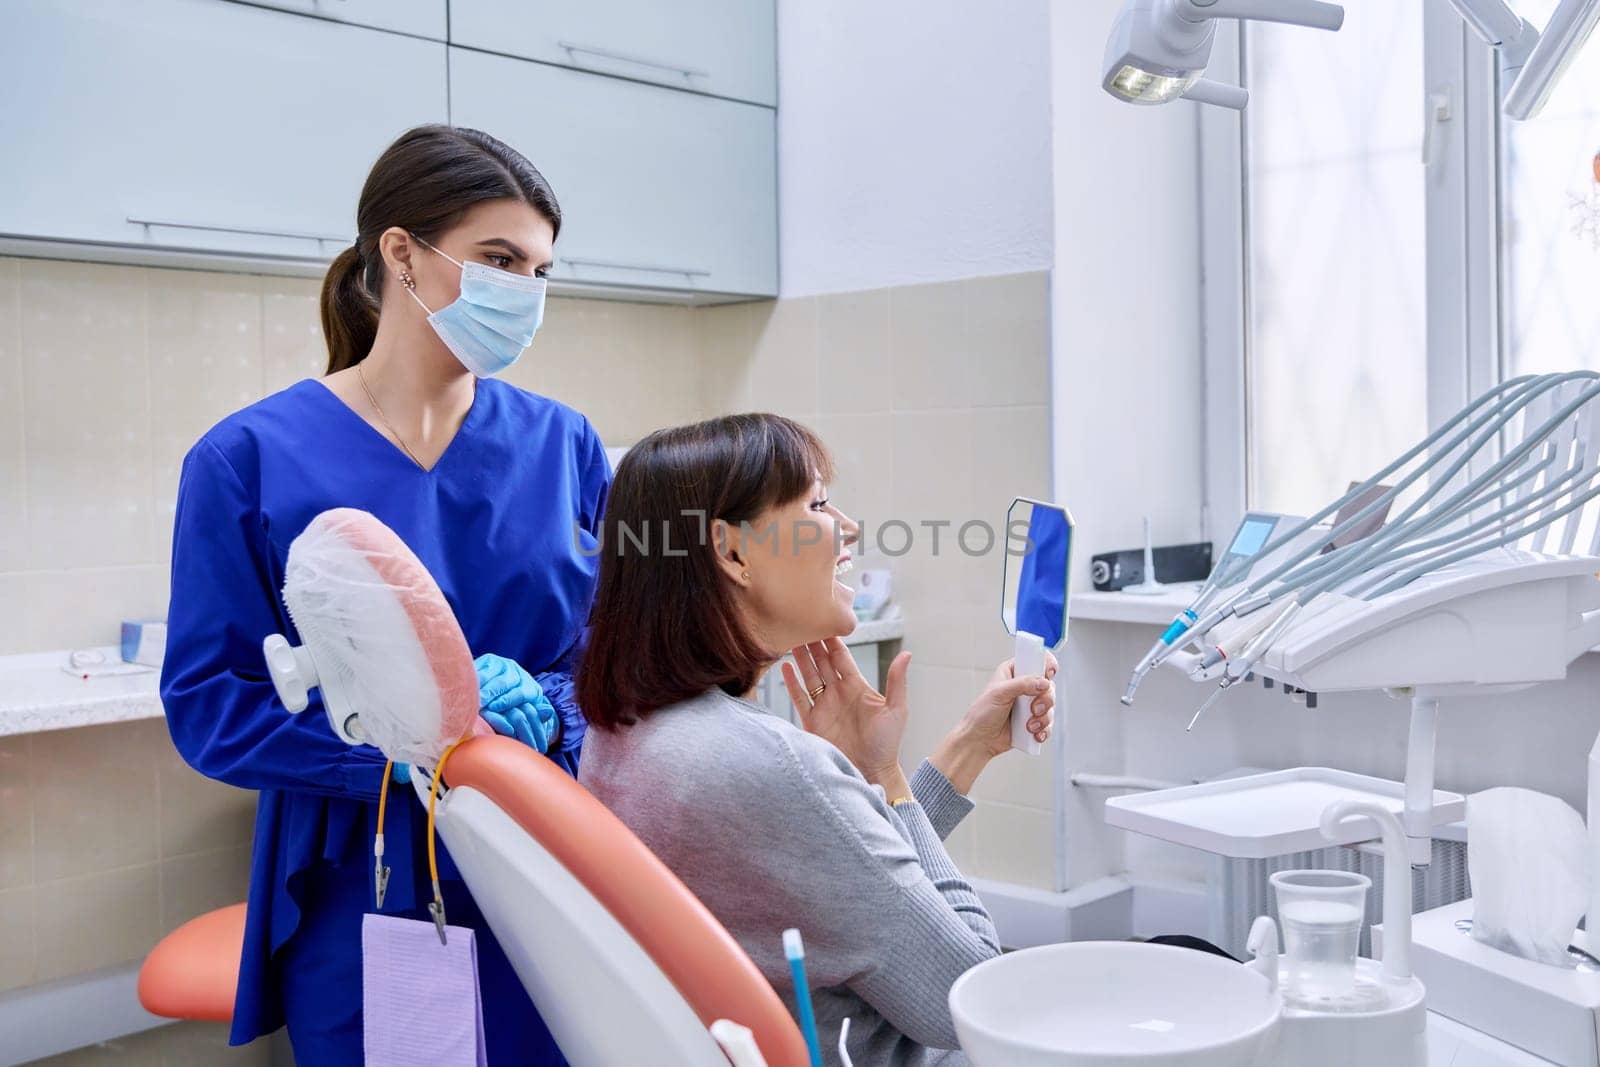 Dentist's office, woman patient looking at her teeth in the mirror. Doctor dentist near the dental chair with tools. Treatment, dental care, prosthetics, orthodontics, dentistry concept